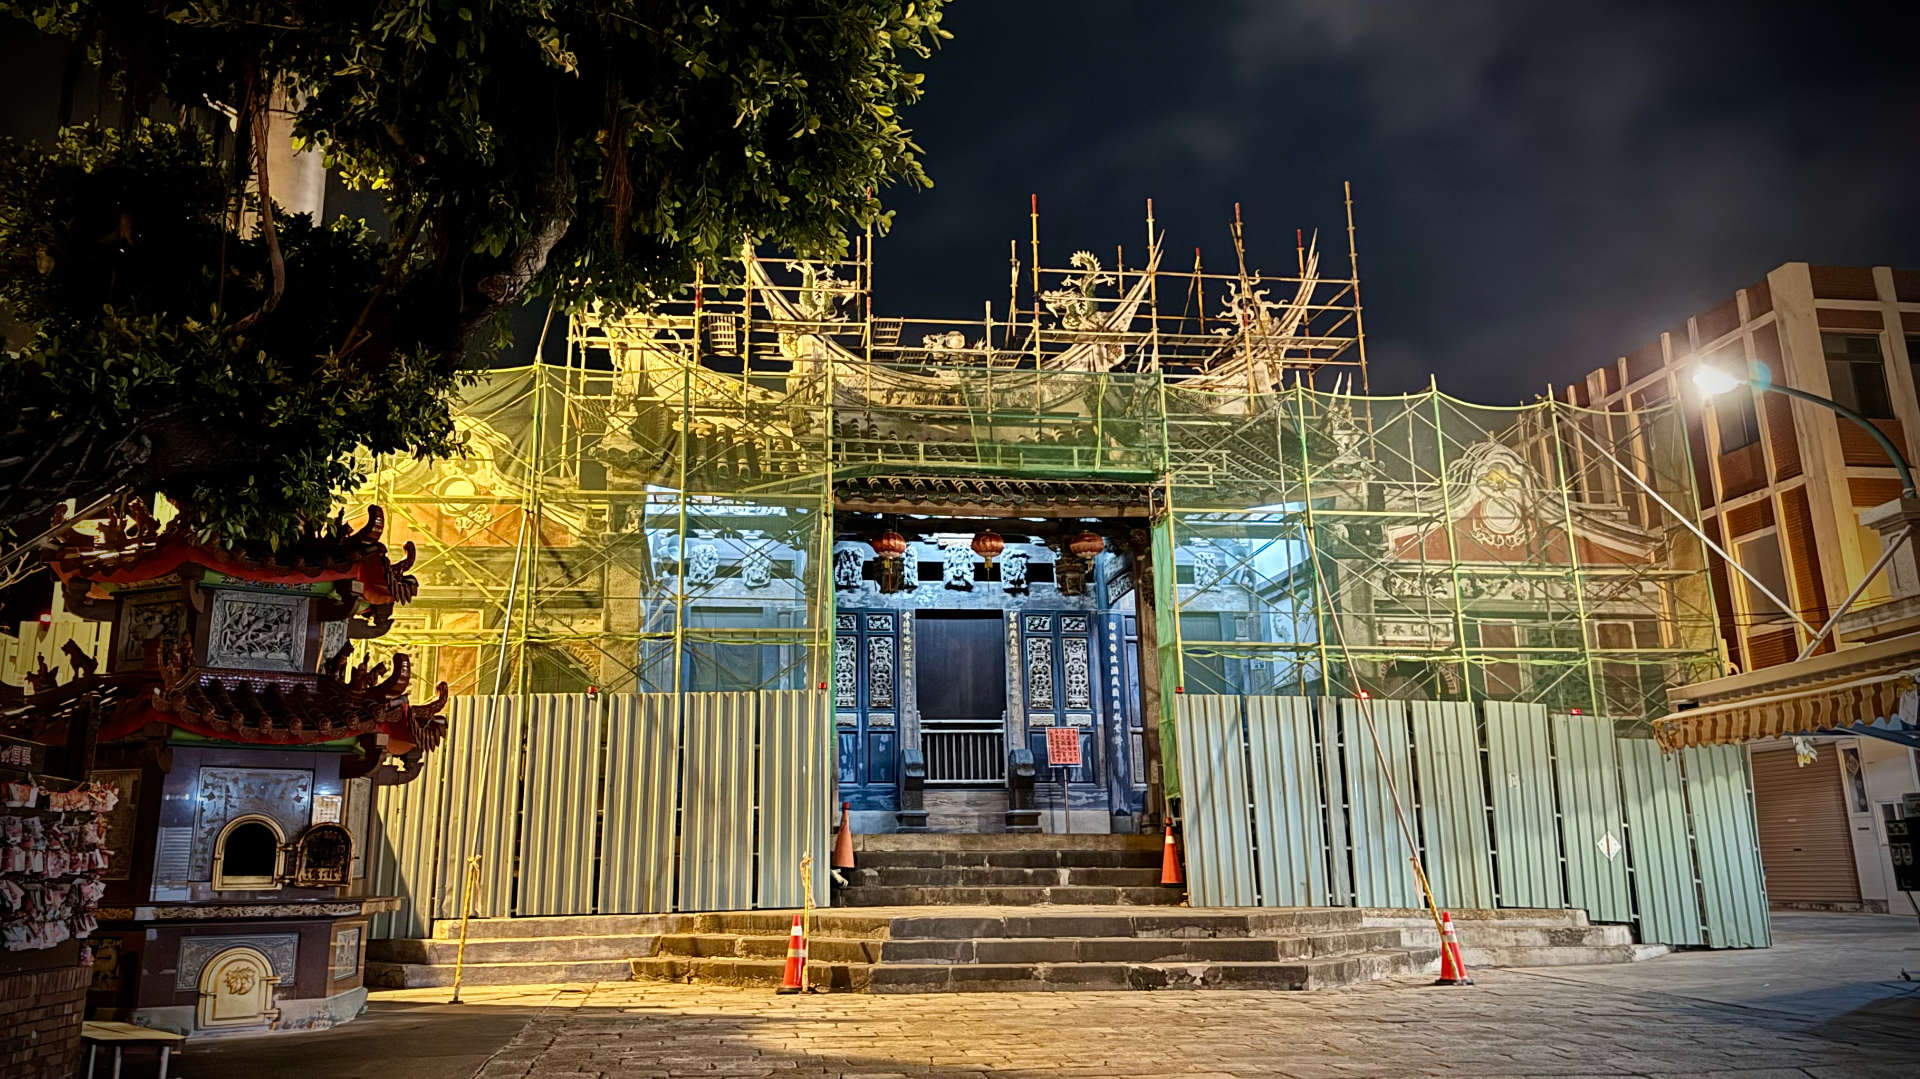 Penghu Tianhou Temple obscured by scaffolding at night.